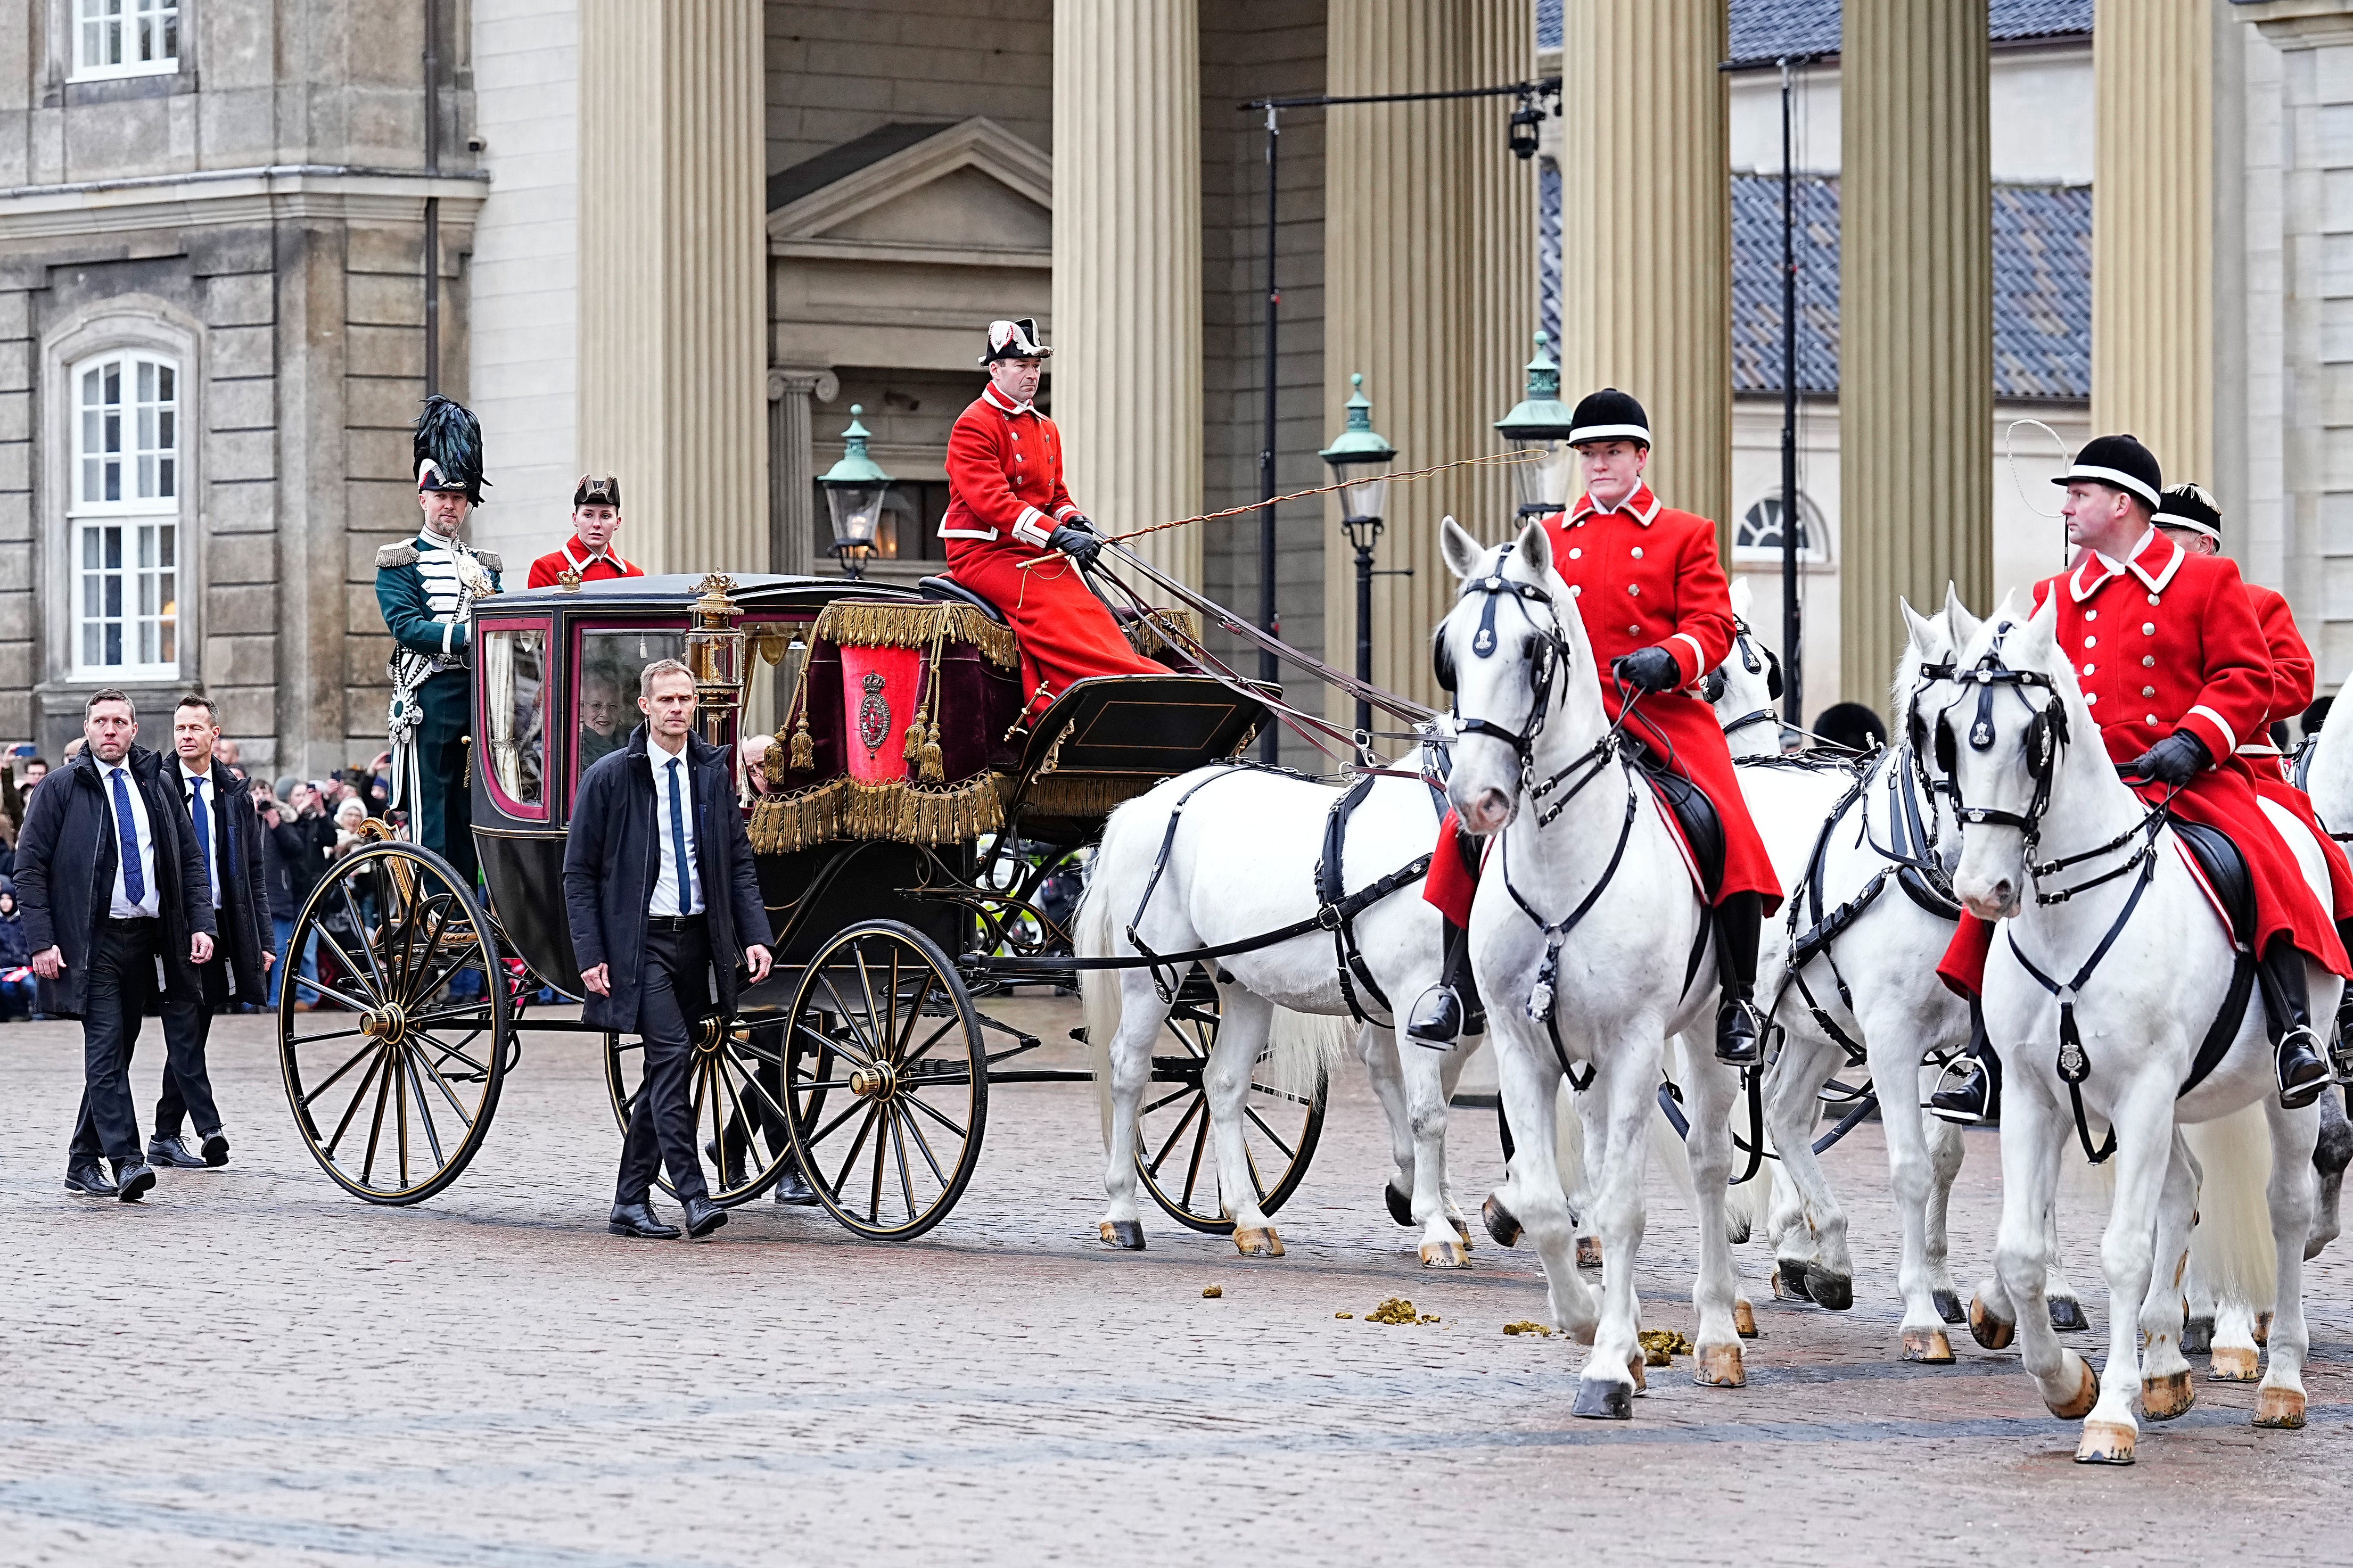 Queen Margrethe II of Denmark leaves for the proclamation of King Frederik X and Queen Mary of Denmark at Amalienborg Palace Square